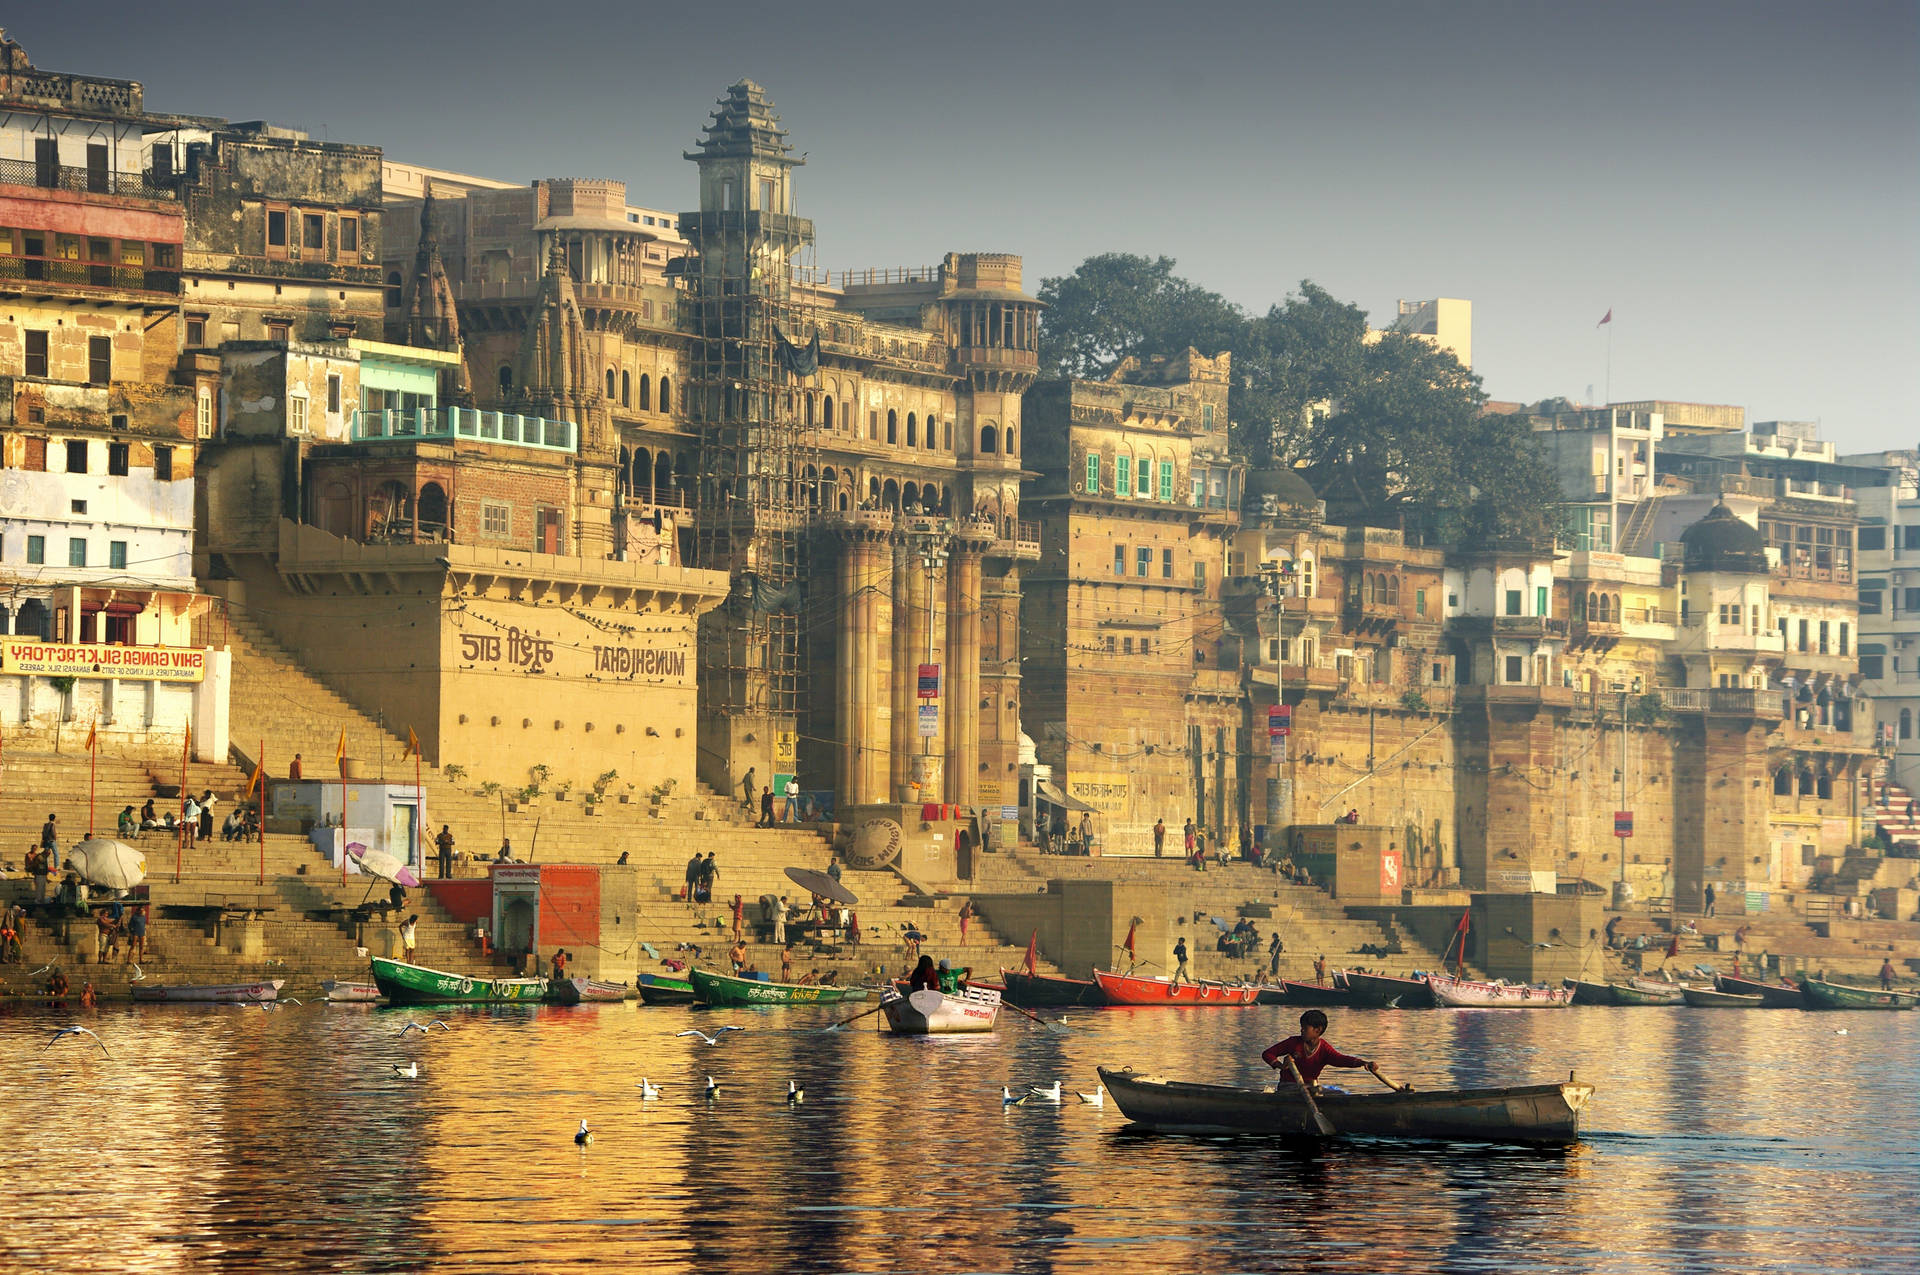 Kolkatadarbhanga Ghat Is Not A Computer Or Mobile Wallpaper-related Phrase. It Appears To Be A Location Or Landmark. Could You Please Provide Sentences Related To Computer Or Mobile Wallpapers That You Would Like To Have Translated Into German? Wallpaper